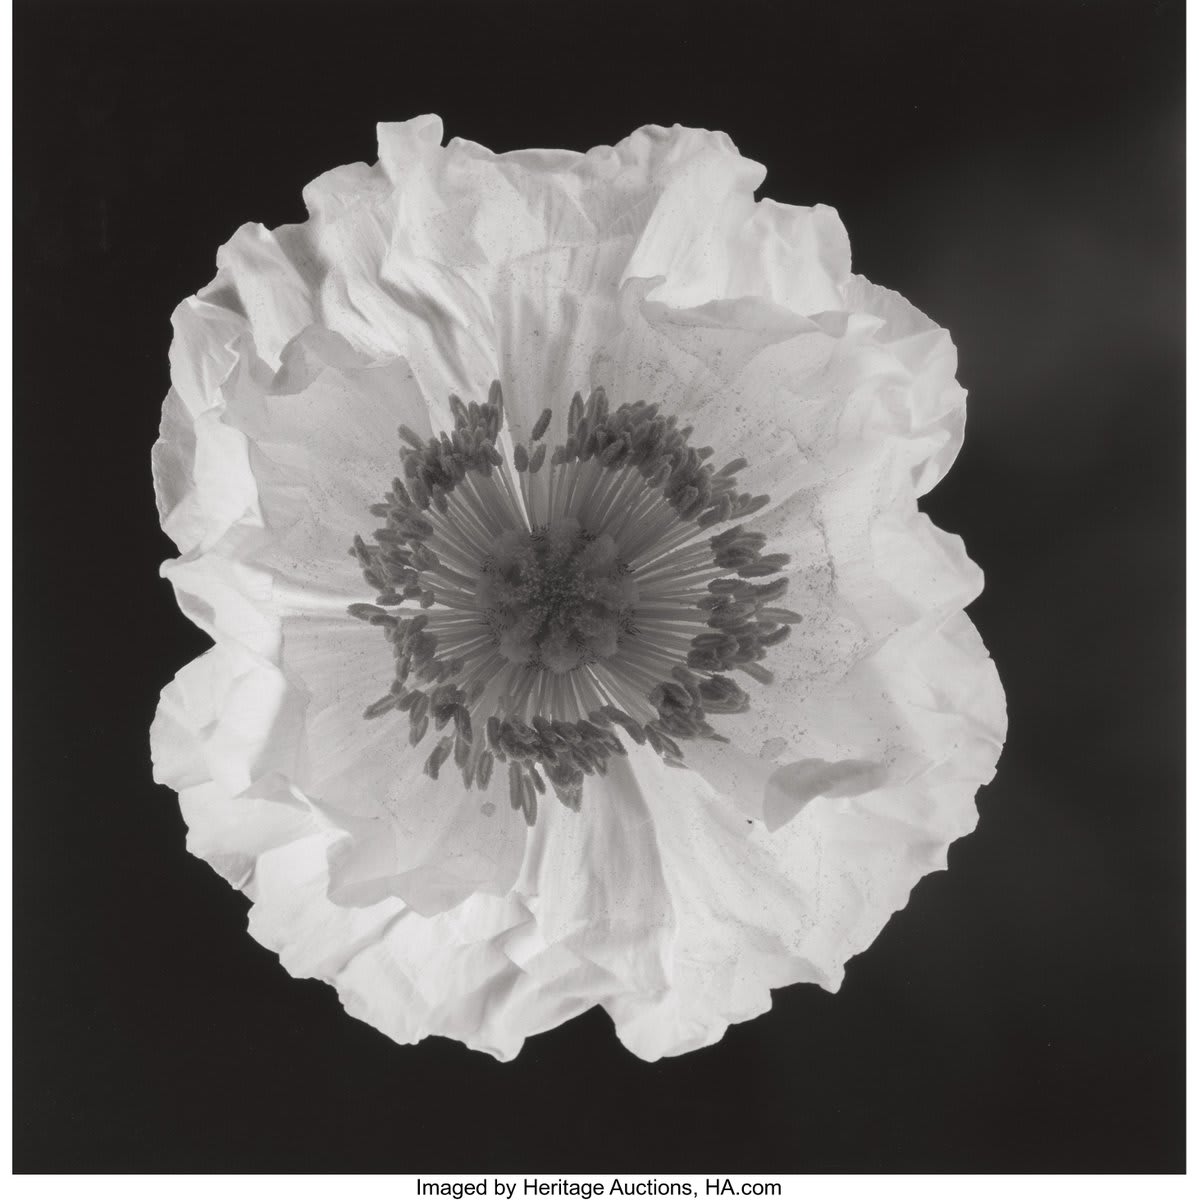 The next @HeritageAuction of Photographs in New York is on June 5. Mark your calendar and visit https://t.co/6KmrnUWXD5 for more information about the lots available. https://t.co/qbVgEZiQkC Robert Mapplethorpe, Poppy, 1988. Courtesy Heritage Auctions,